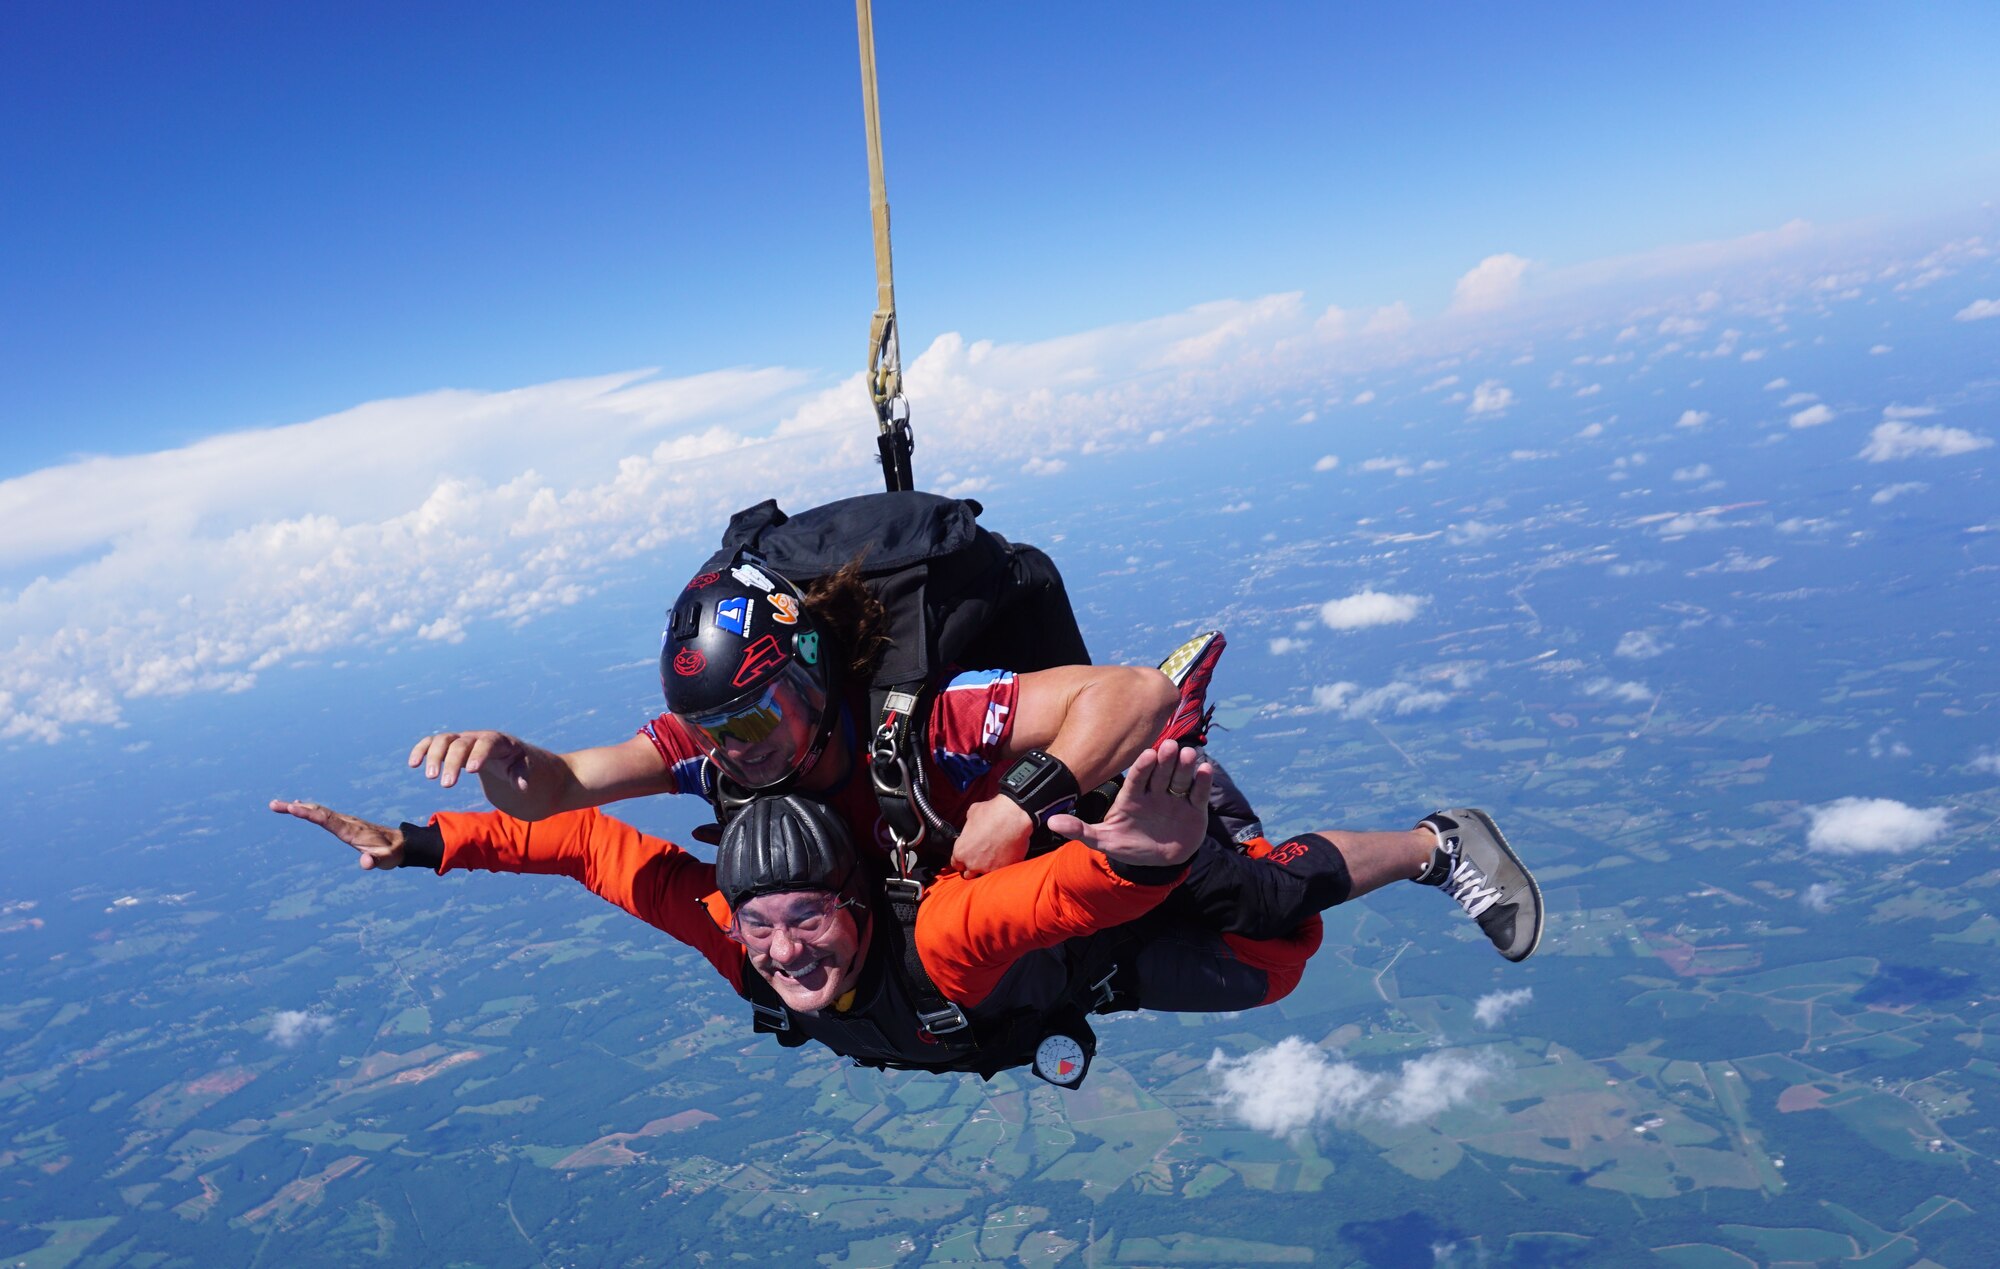 U.S. Air Force Chaplain (Capt.) James Finley, 20th Fighter Wing chaplain, smiles at the camera as he falls from 15,000 feet Chester, S.C., Aug. 11, 2018.